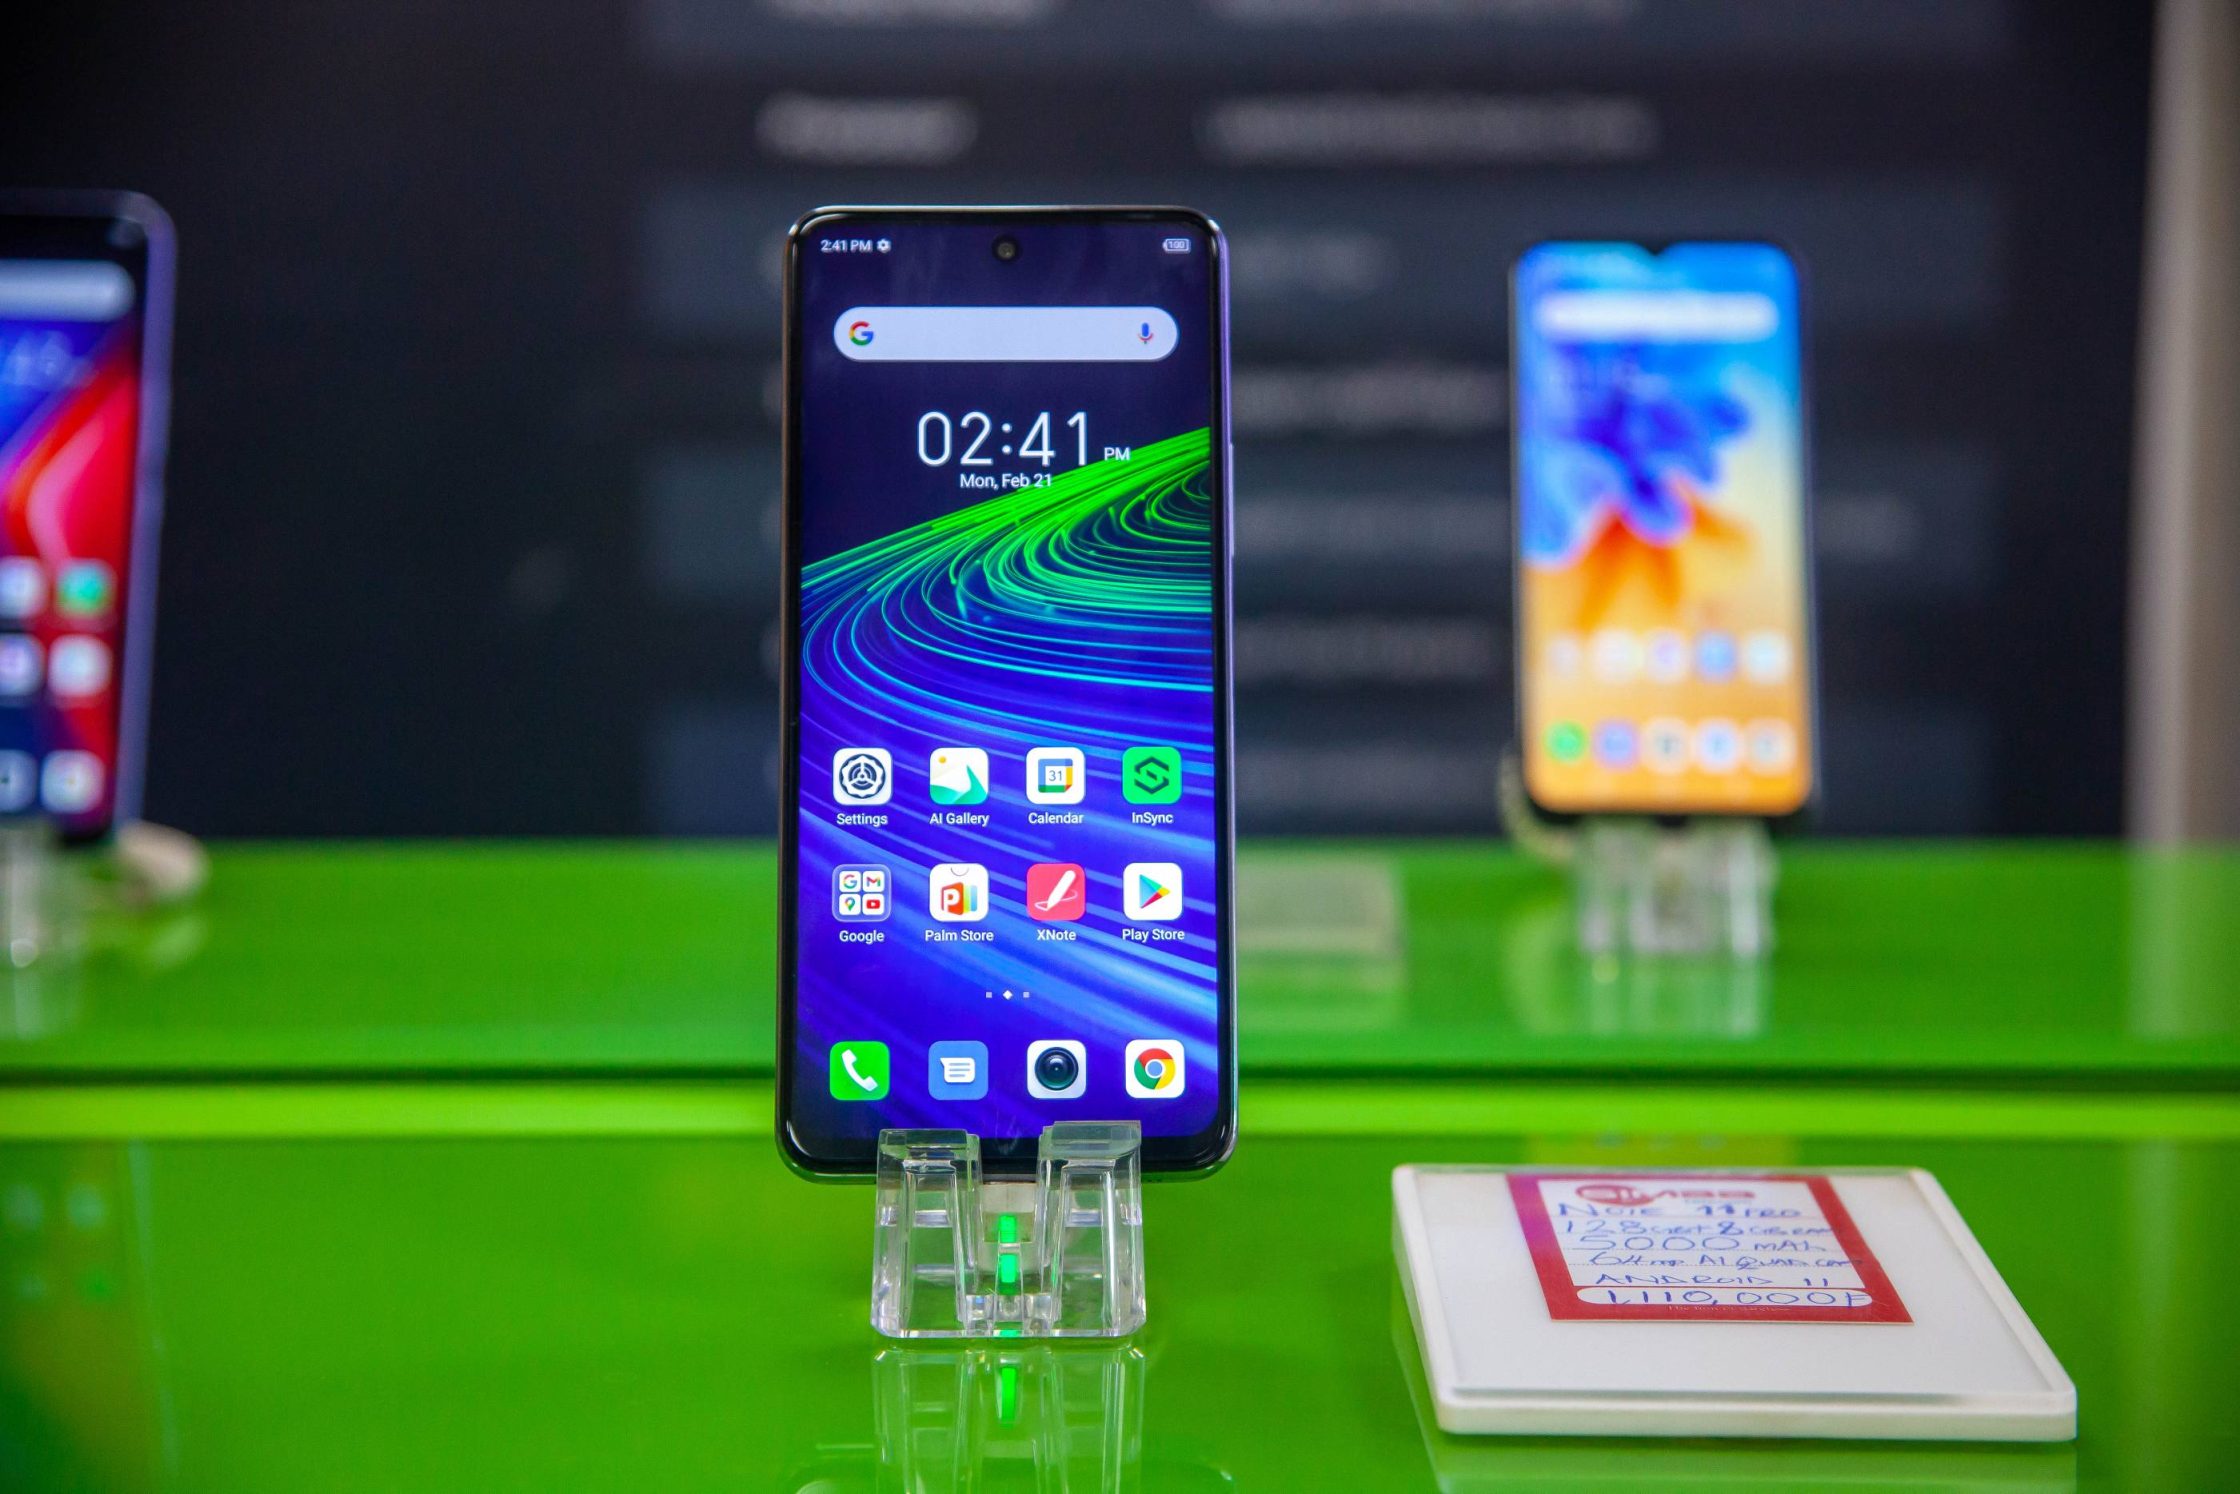 Infinix Hot 8 Price in Nigeria: How Much is Infinix Hot 8 Price in Nigeria